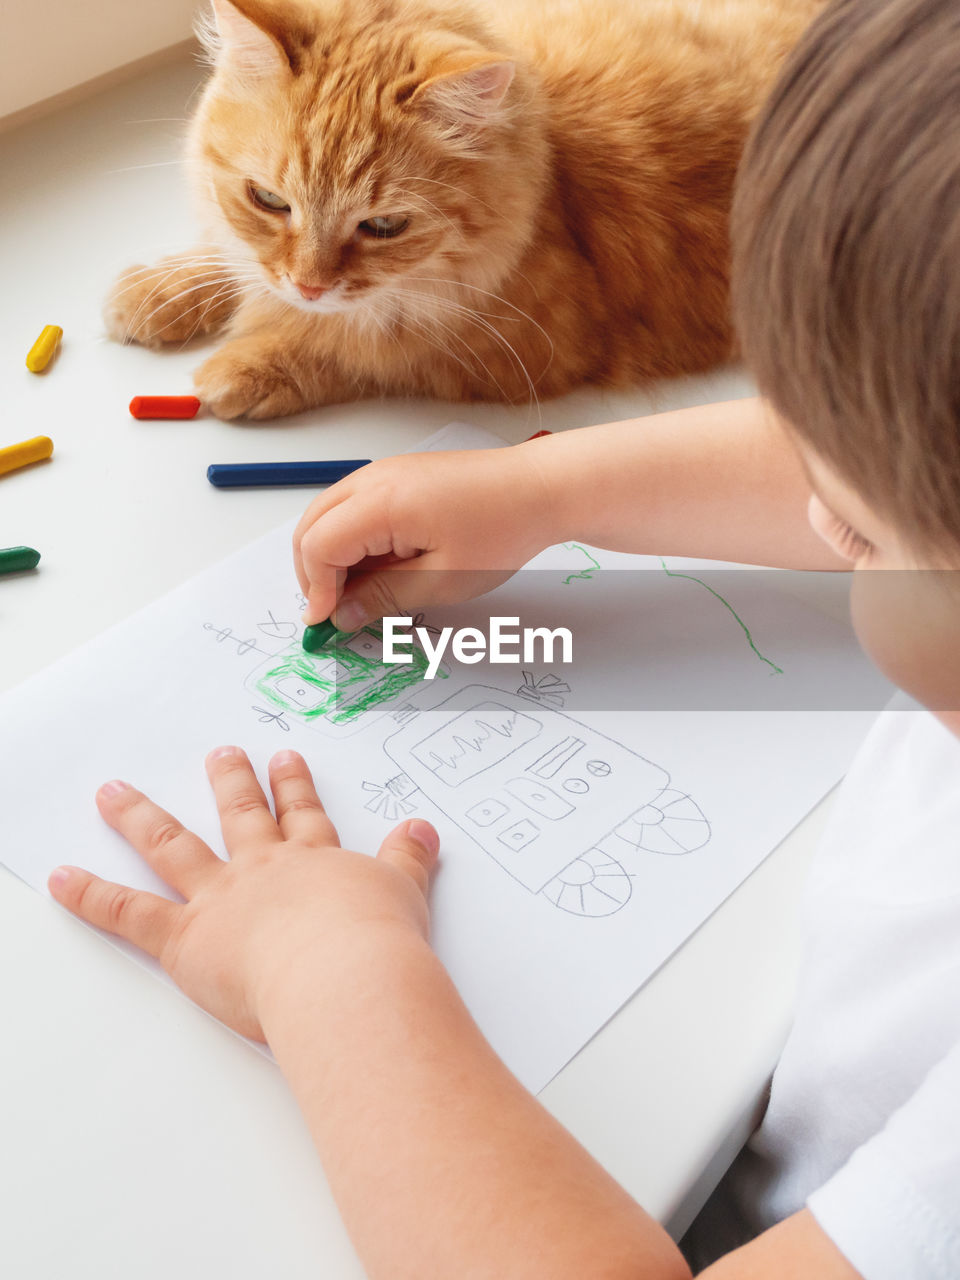 Toddler draws colorful robot. kid uses wax crayons. cute ginger cat on window sill with child. 